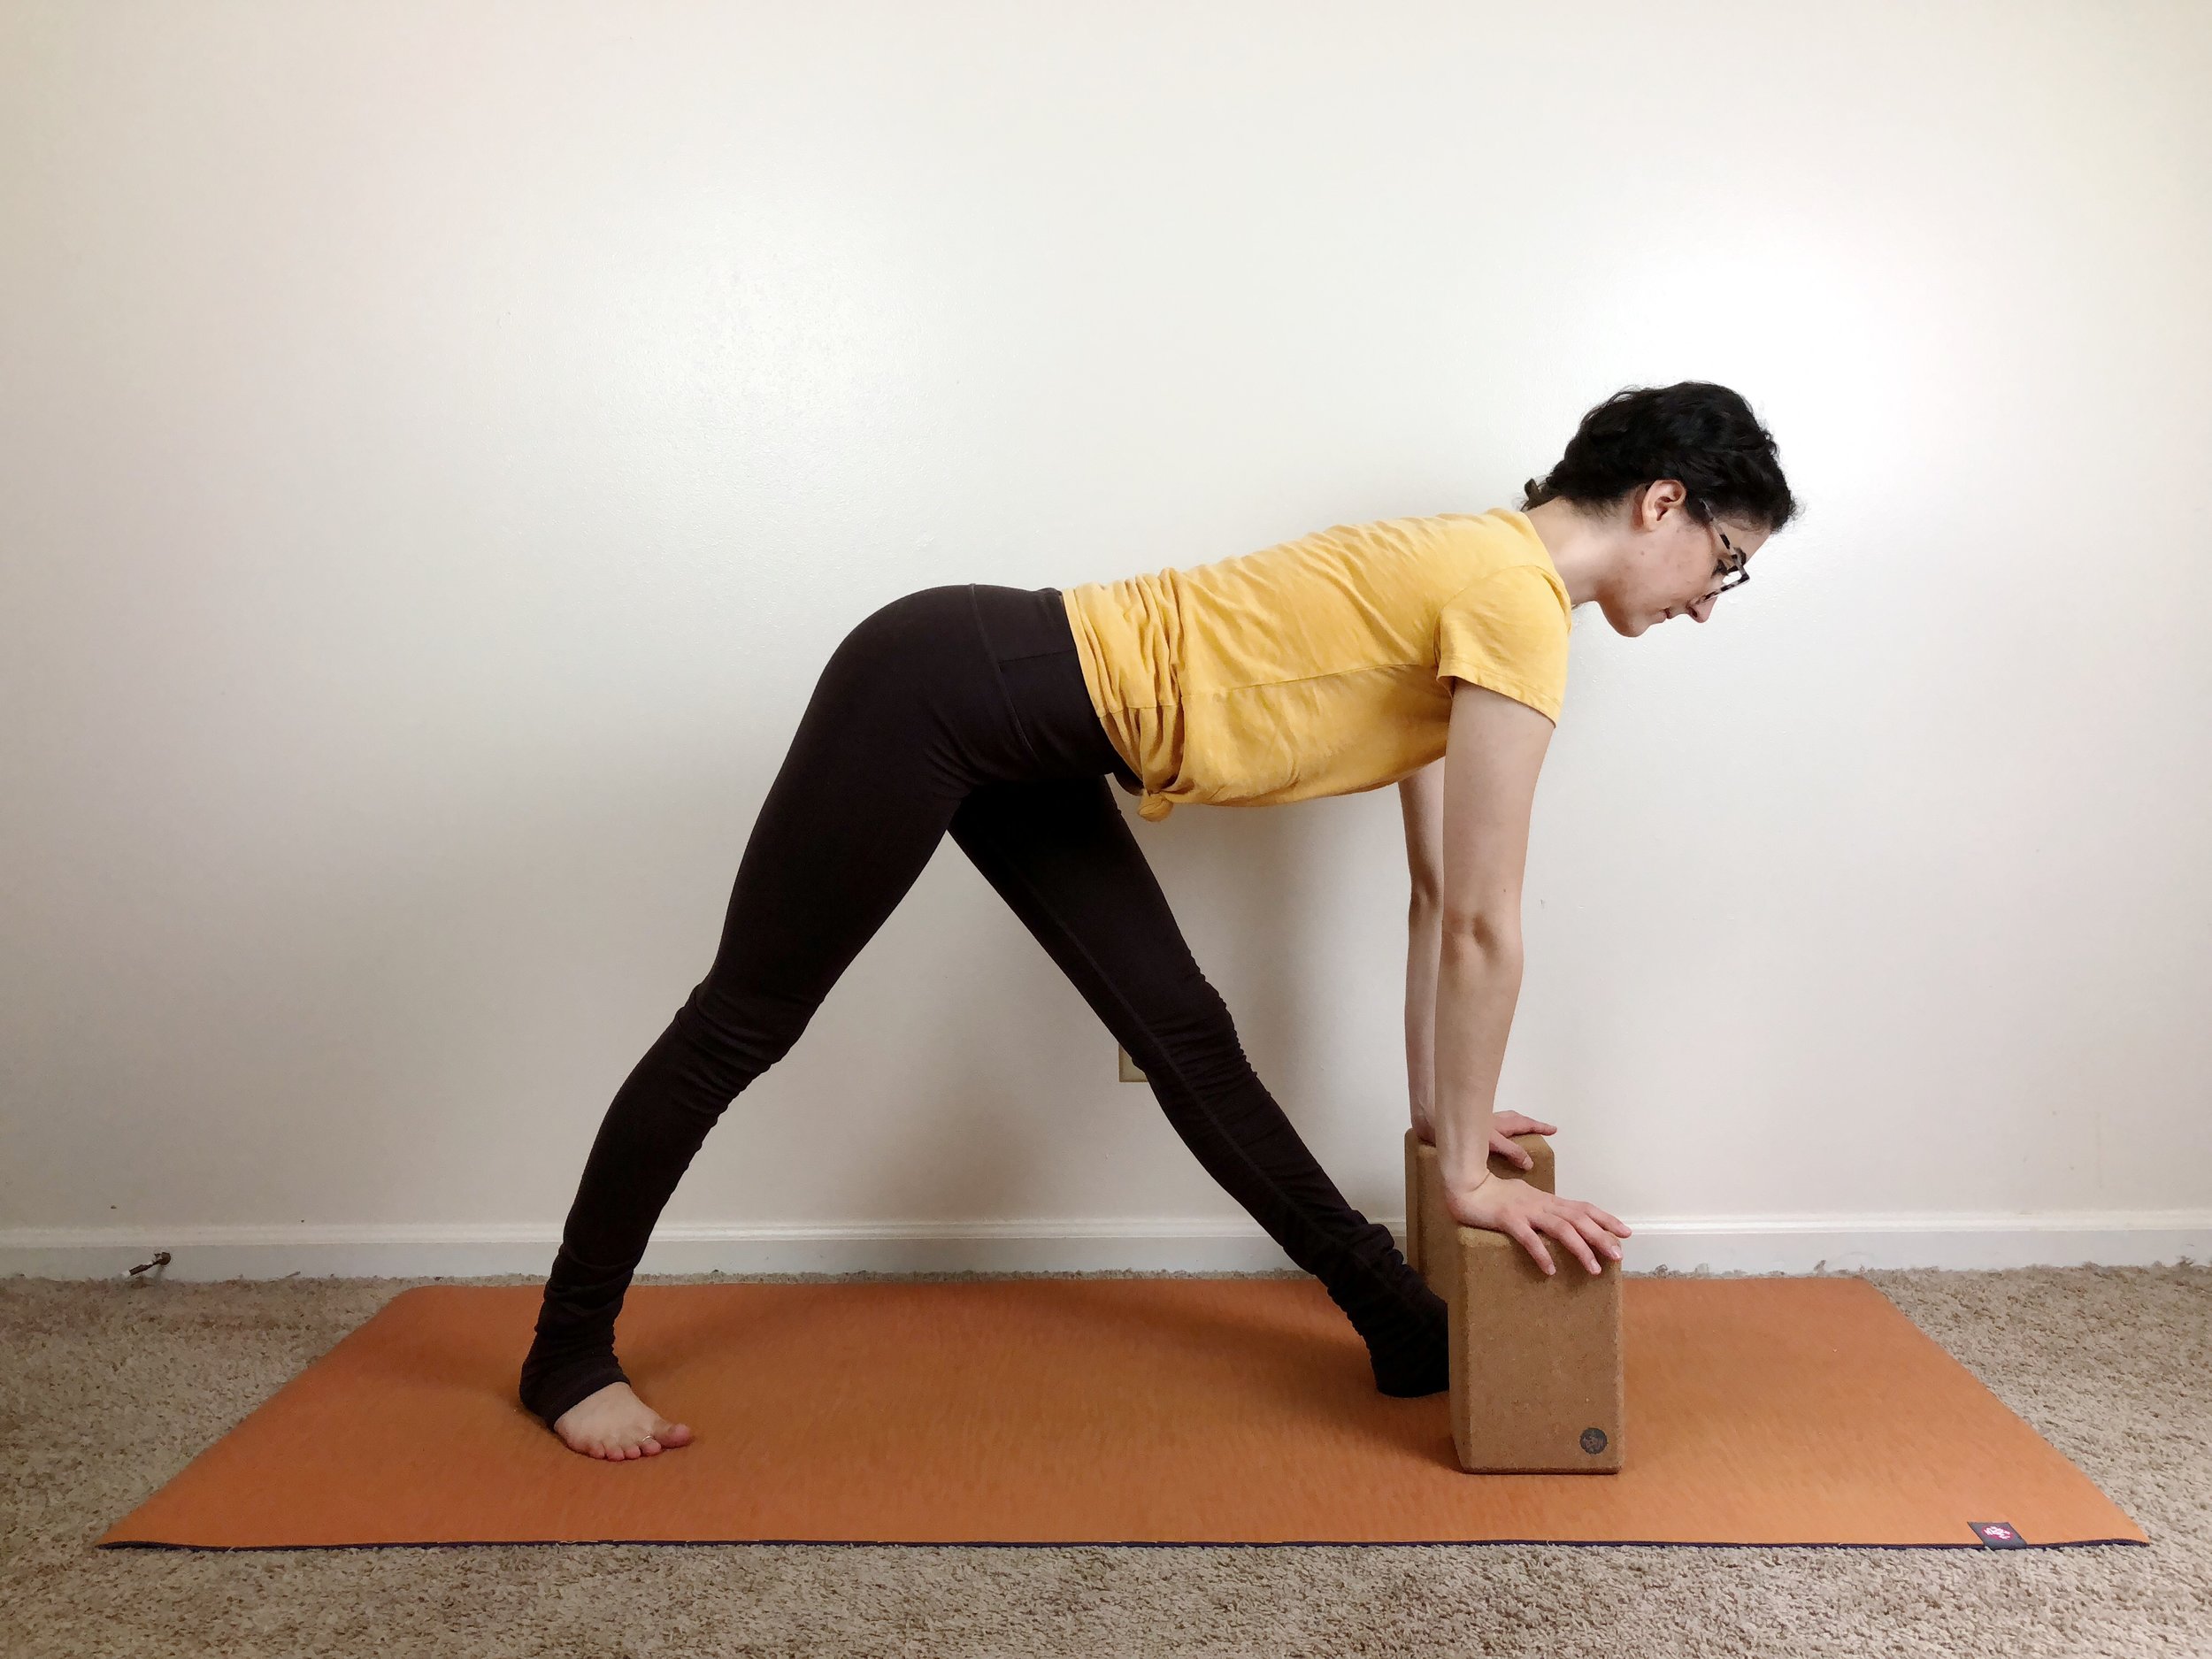 Holistic Hamstrings: Poses to Stretch and Strengthen These Key Muscles